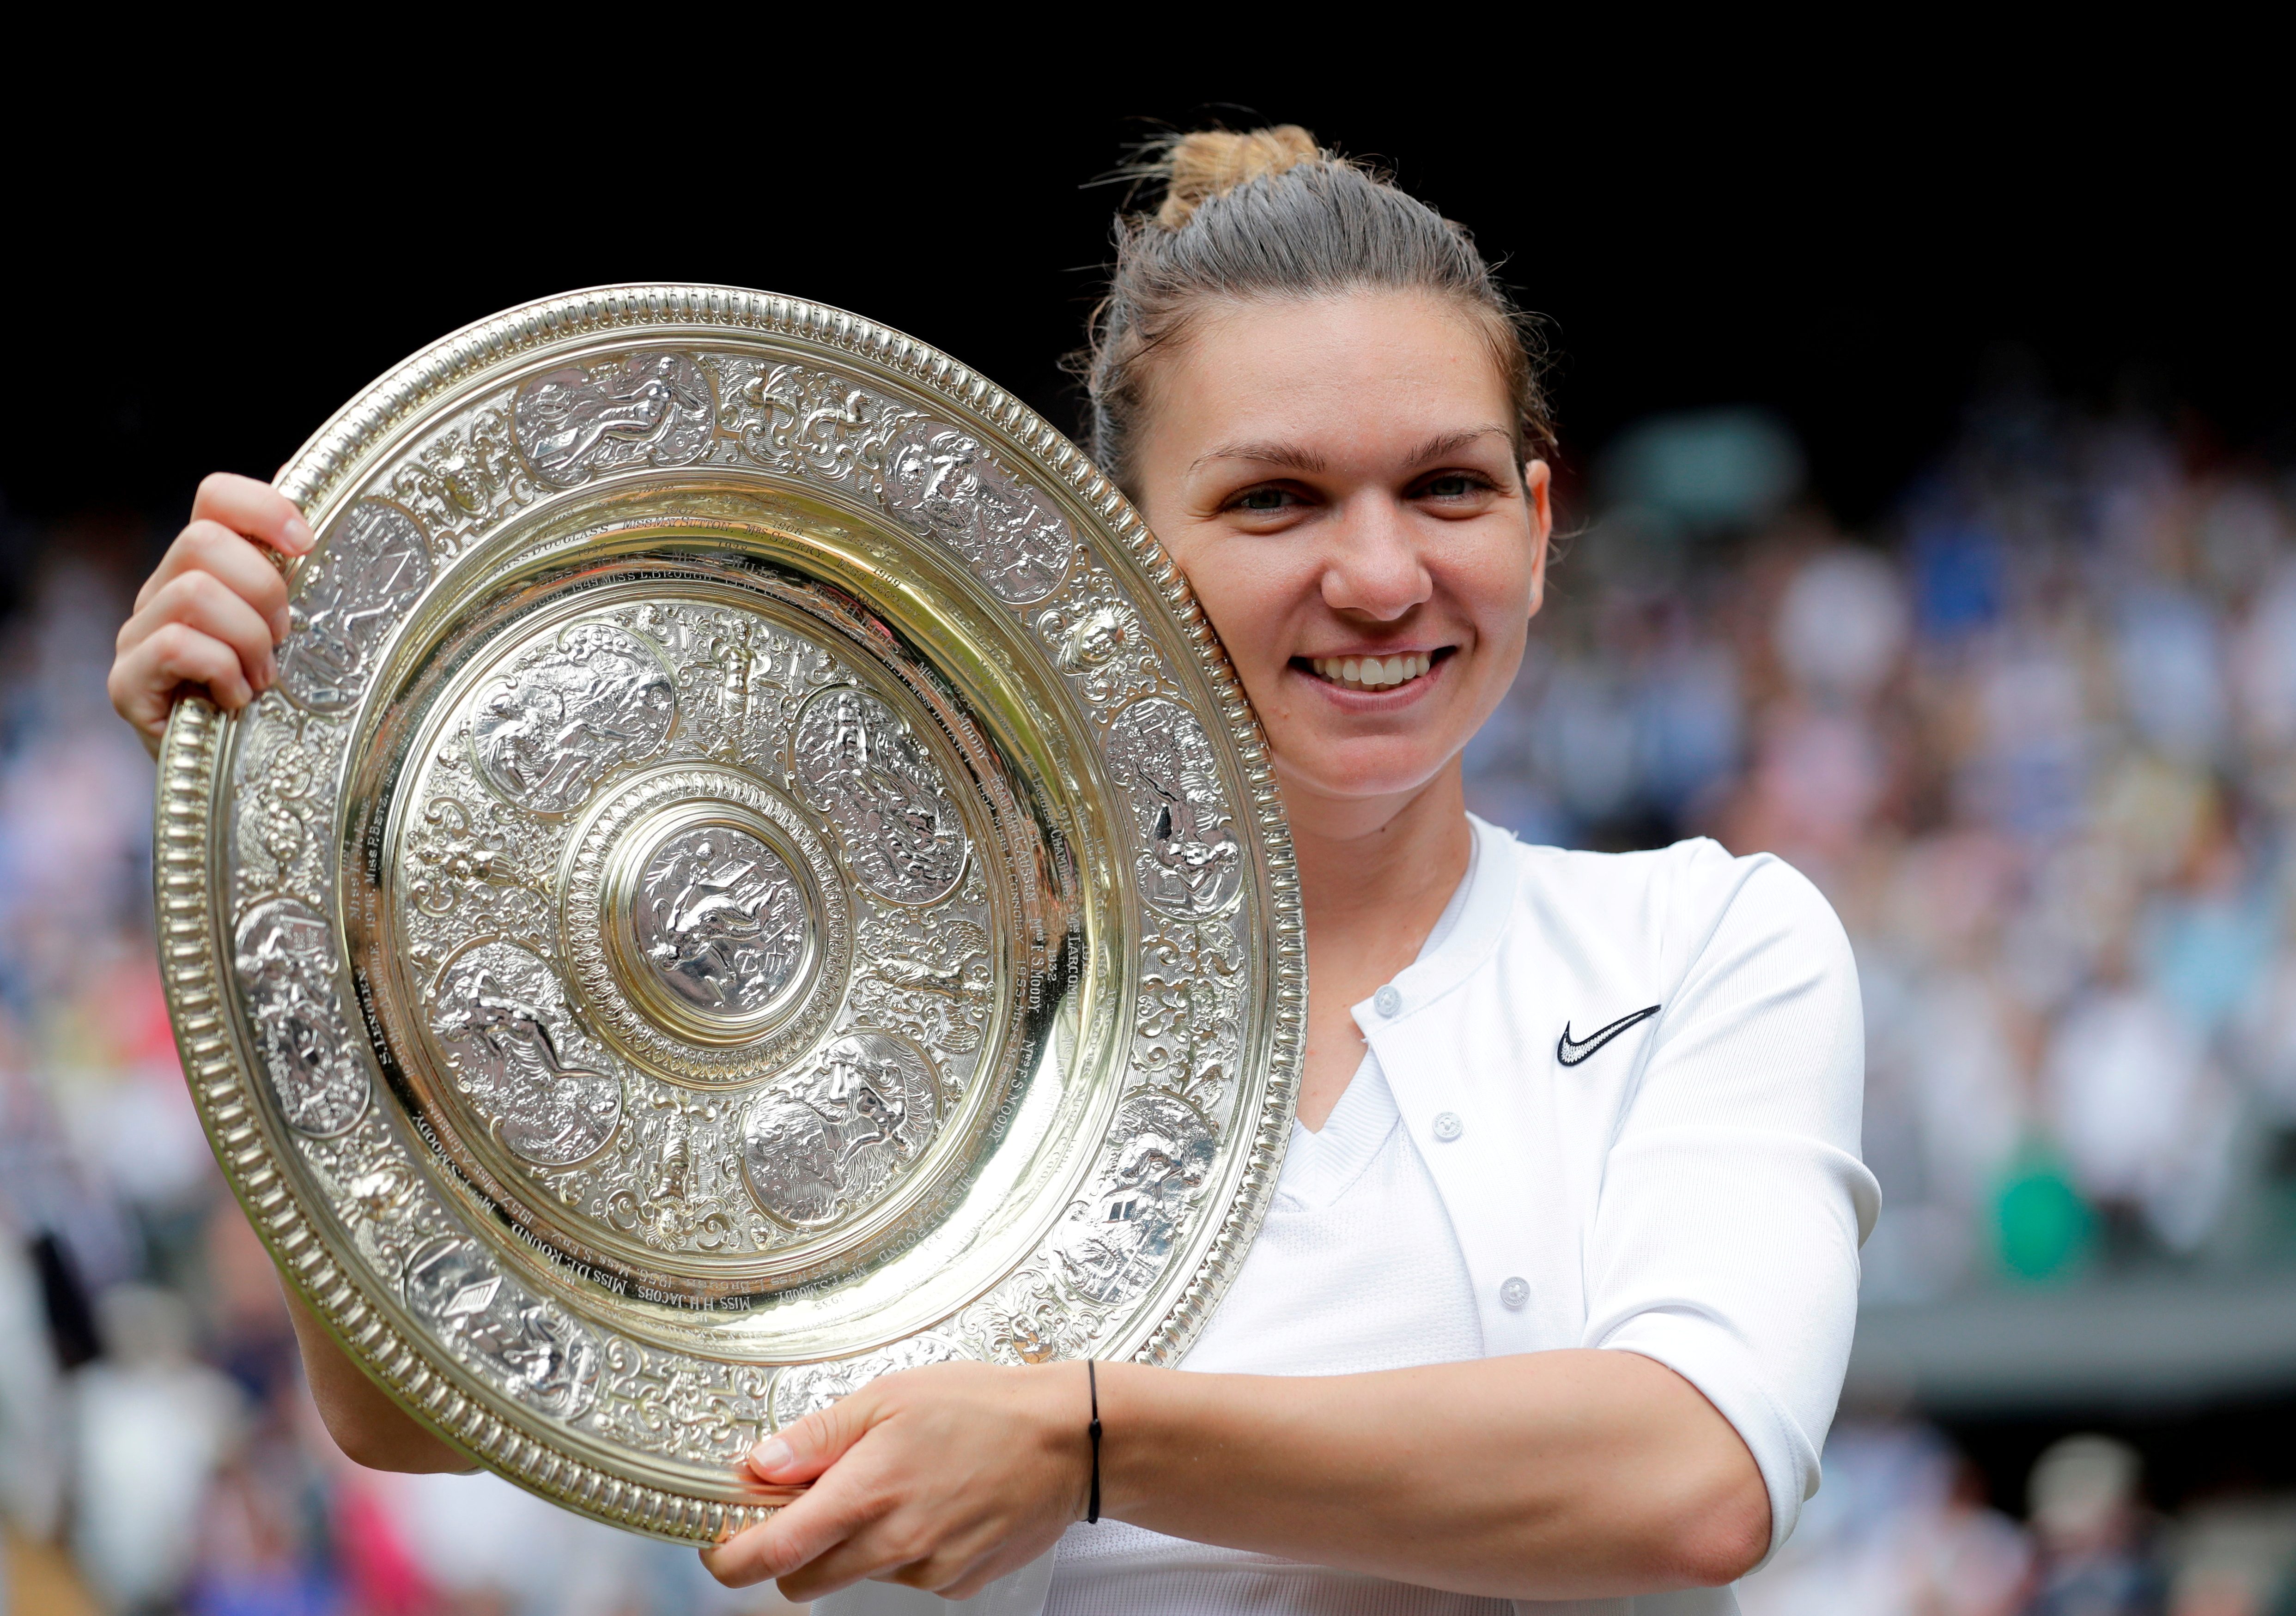 Defending champion Halep withdraws from Wimbledon with calf injury